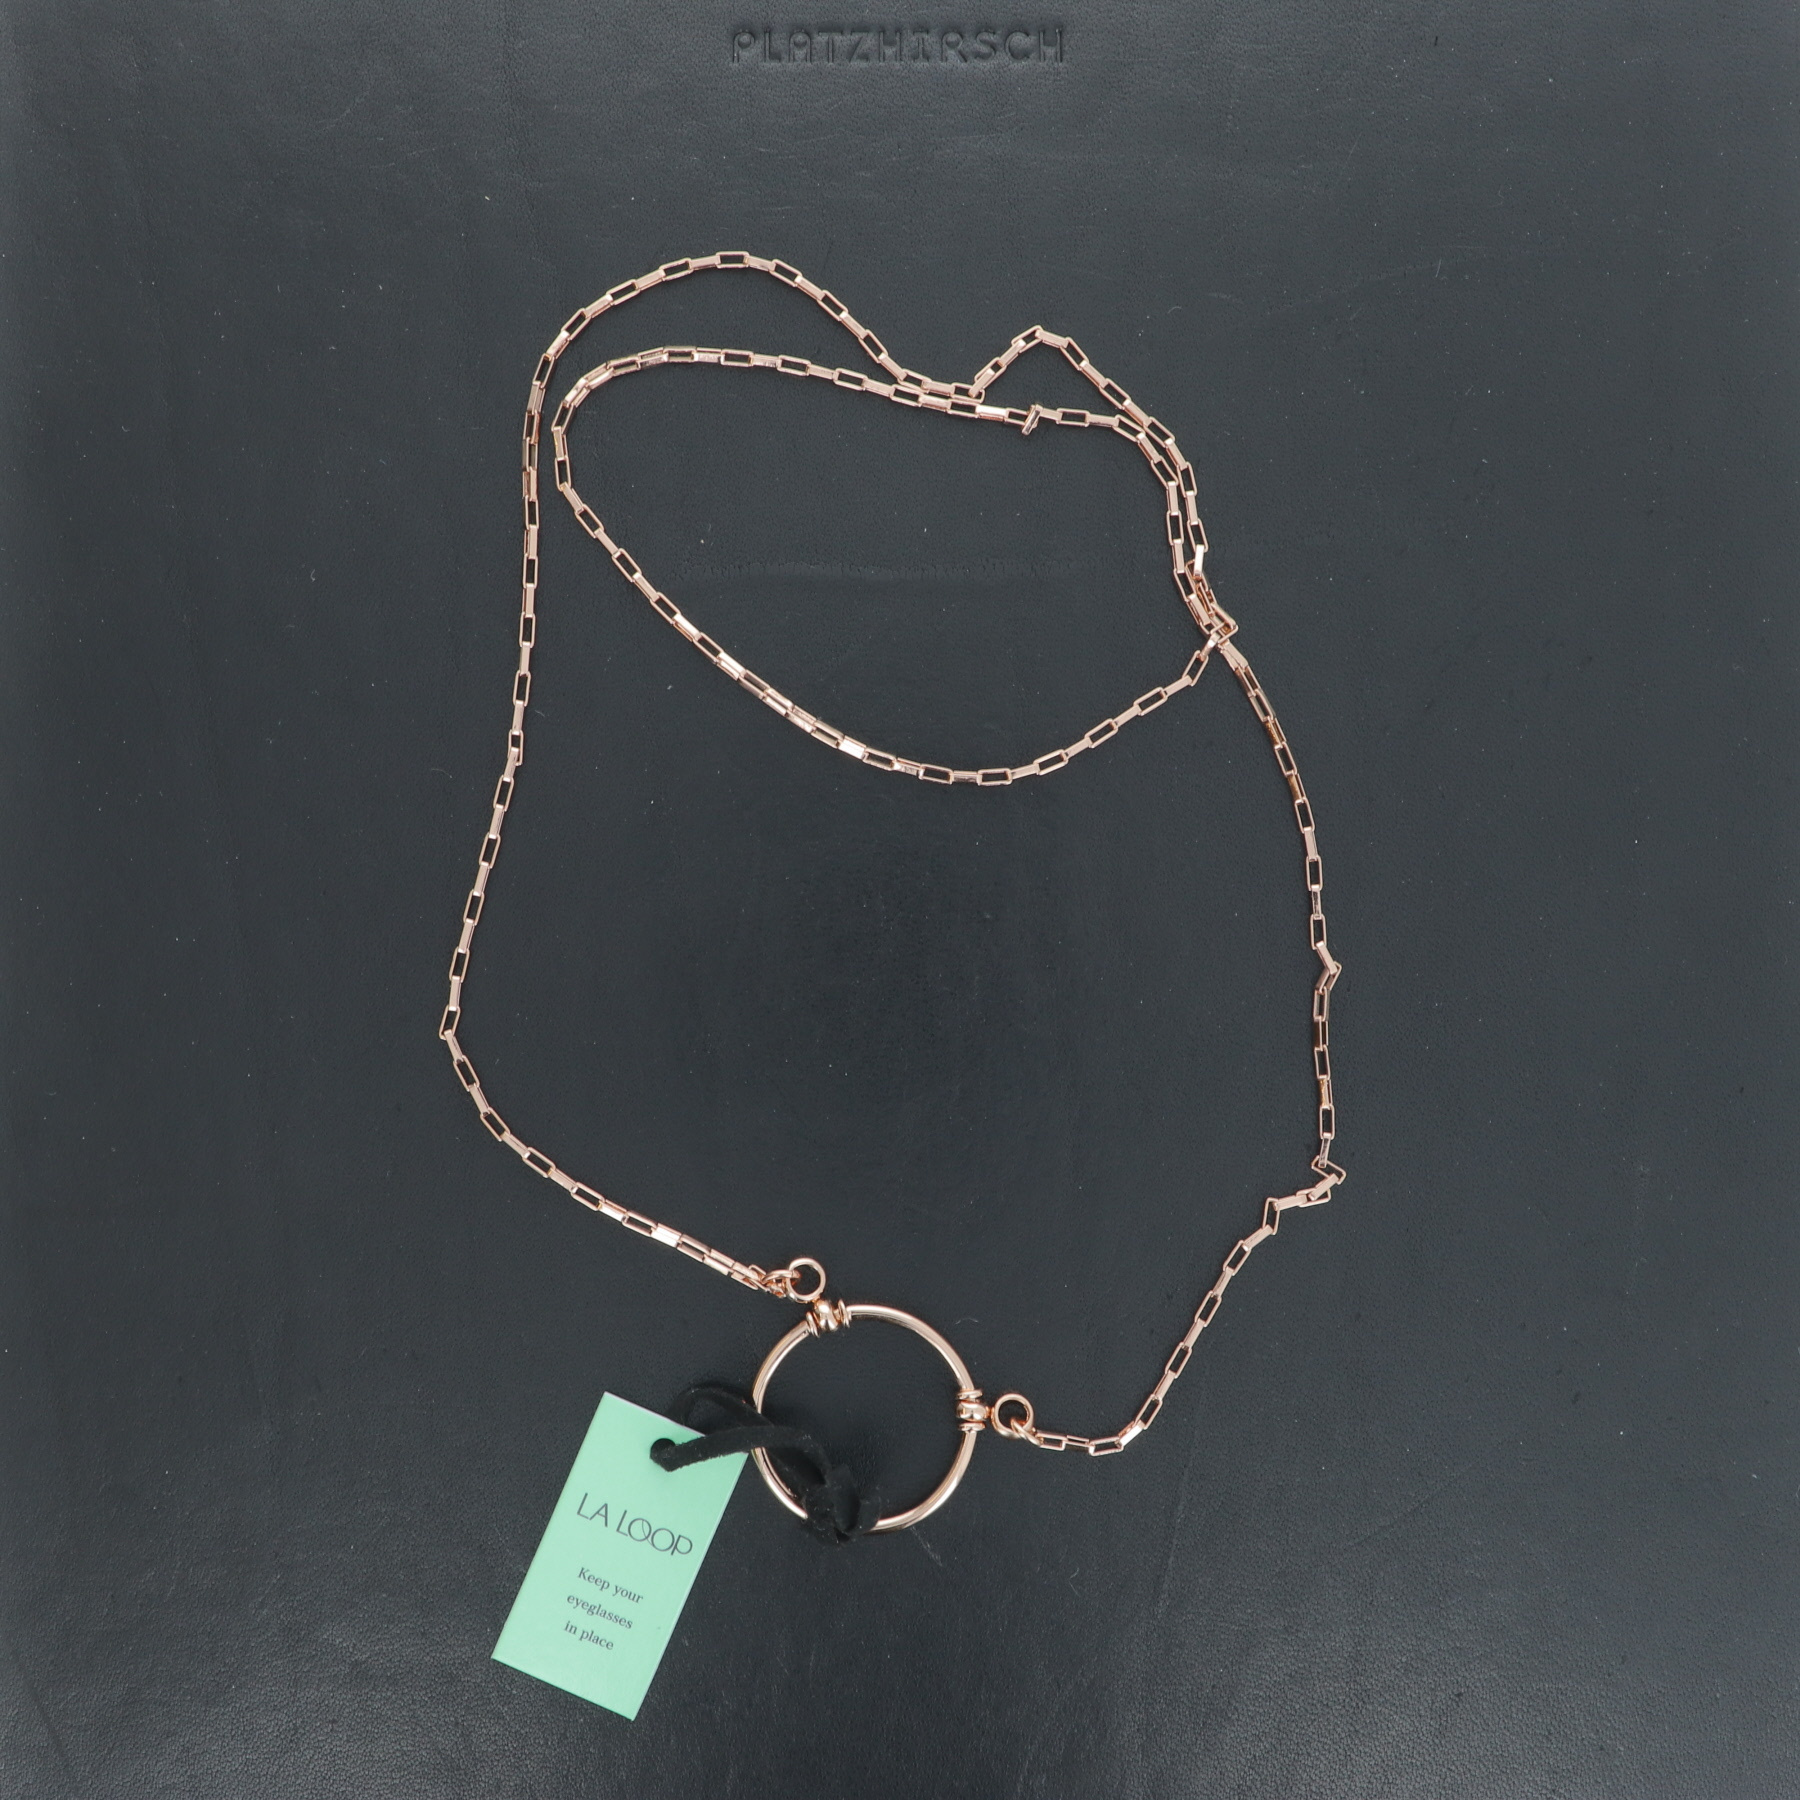 LA LOOP / JEWELRY 425RG / ROSE GOLD PLATED PETITE CHAIN